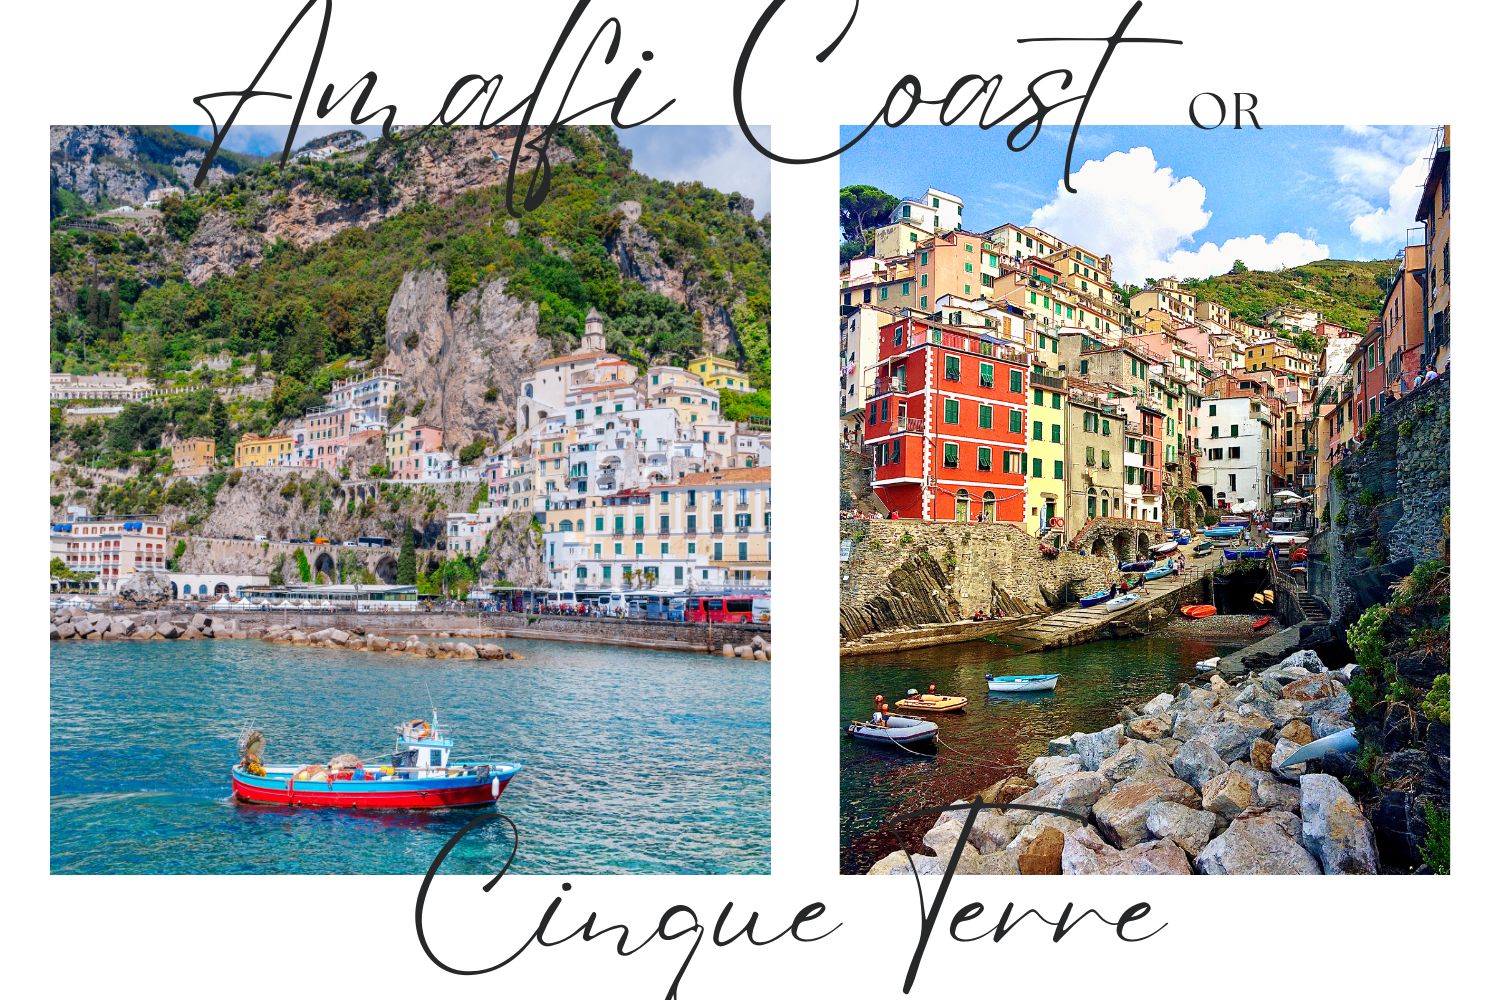 Amalfi Coast or Cinque Terre which is the best to visit go to